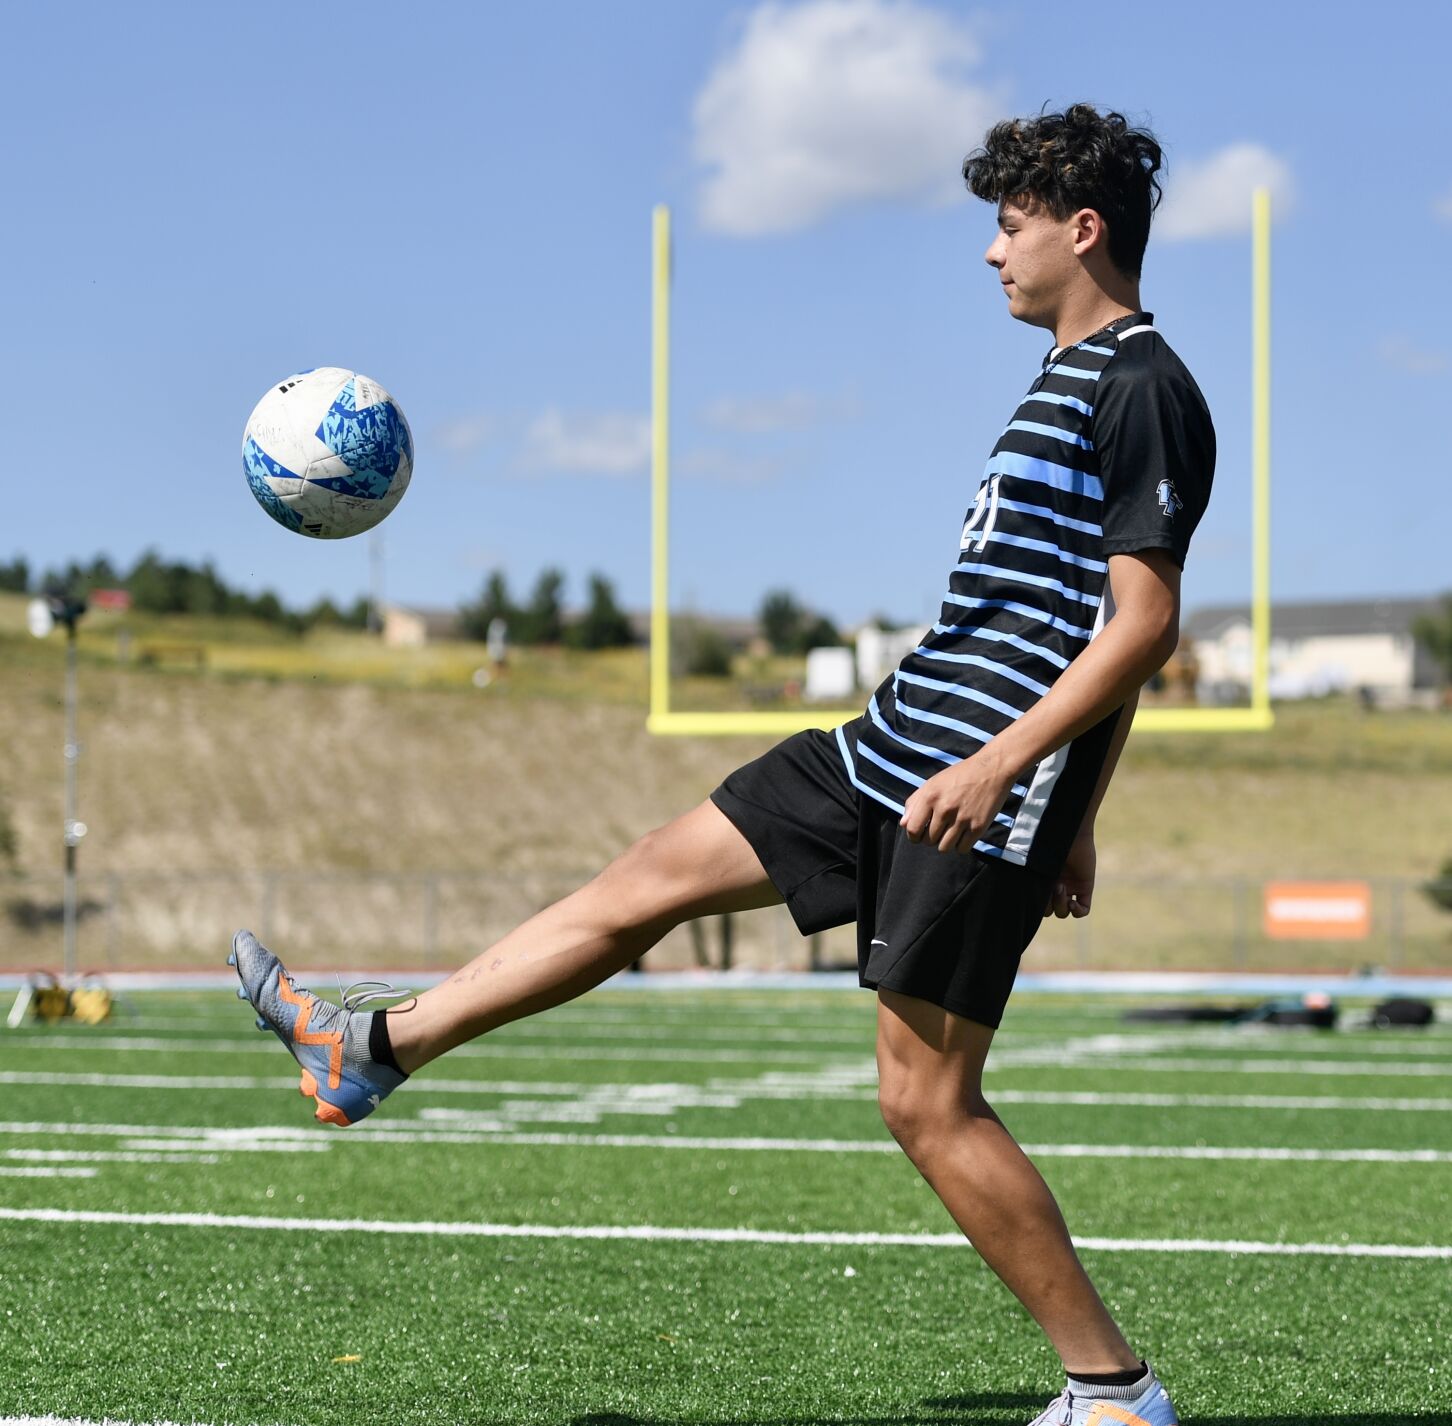 Carson Tapia Shines on the Soccer Field: Scored 13 Goals in Four Games